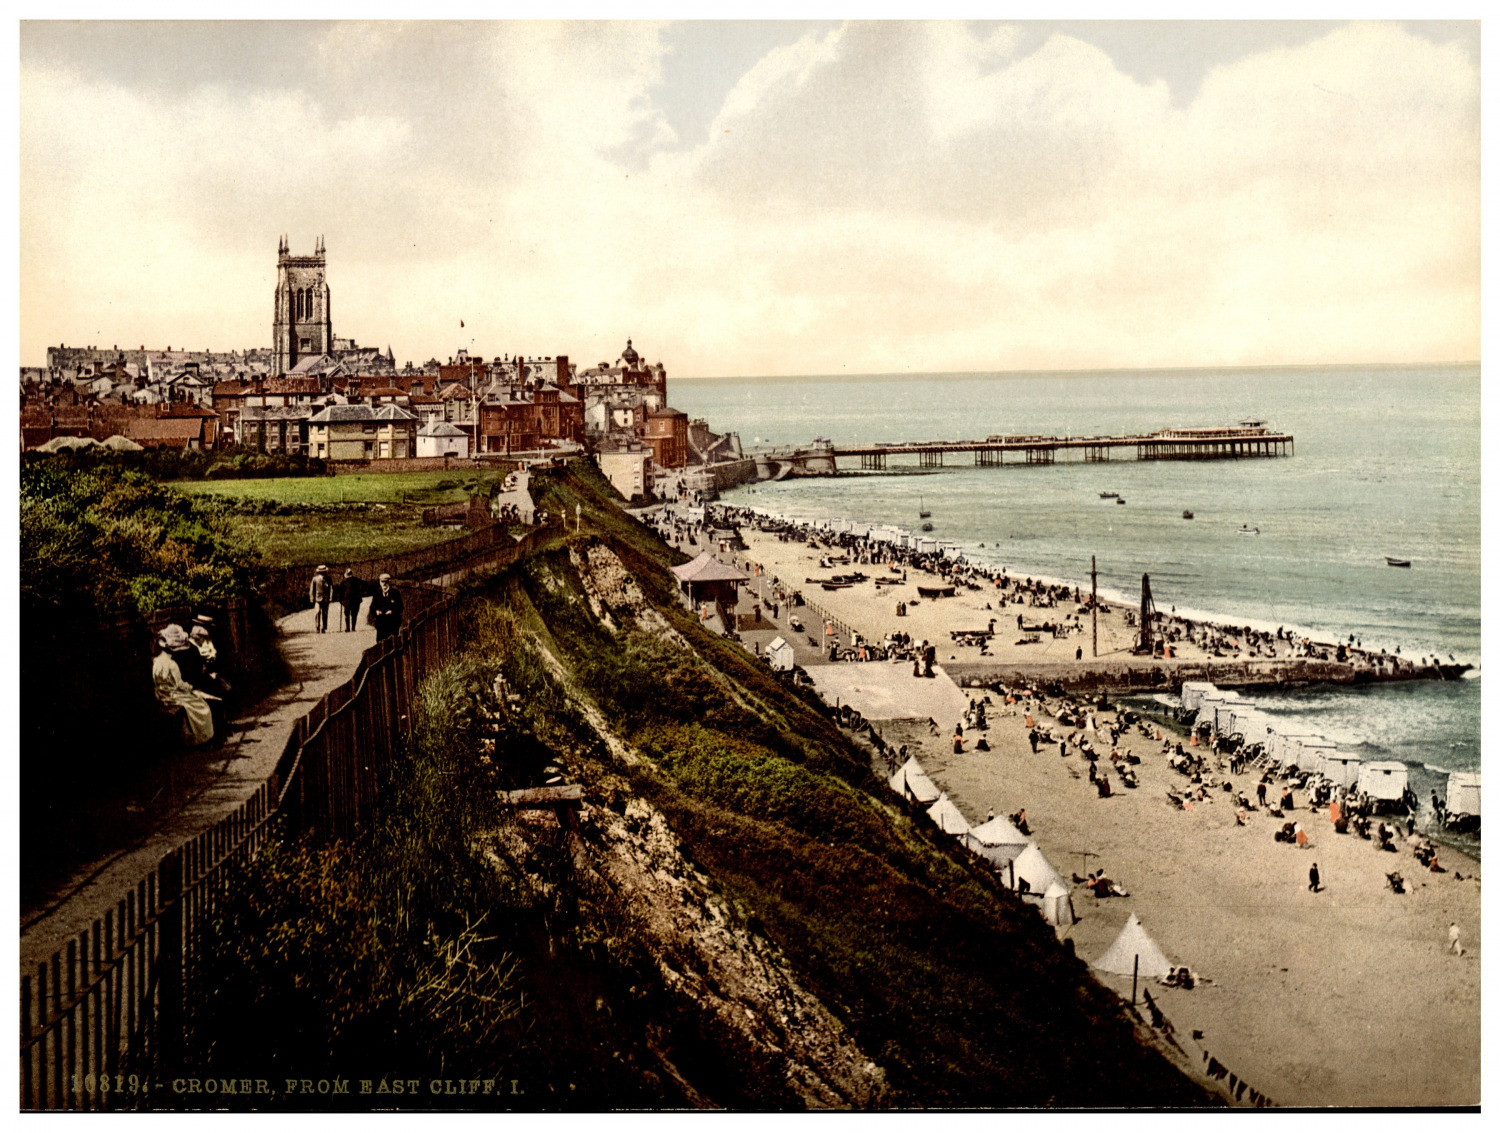 Cromer, from East Clifff I. Vintage photochrome by P.Z, photochrome Zurich photo